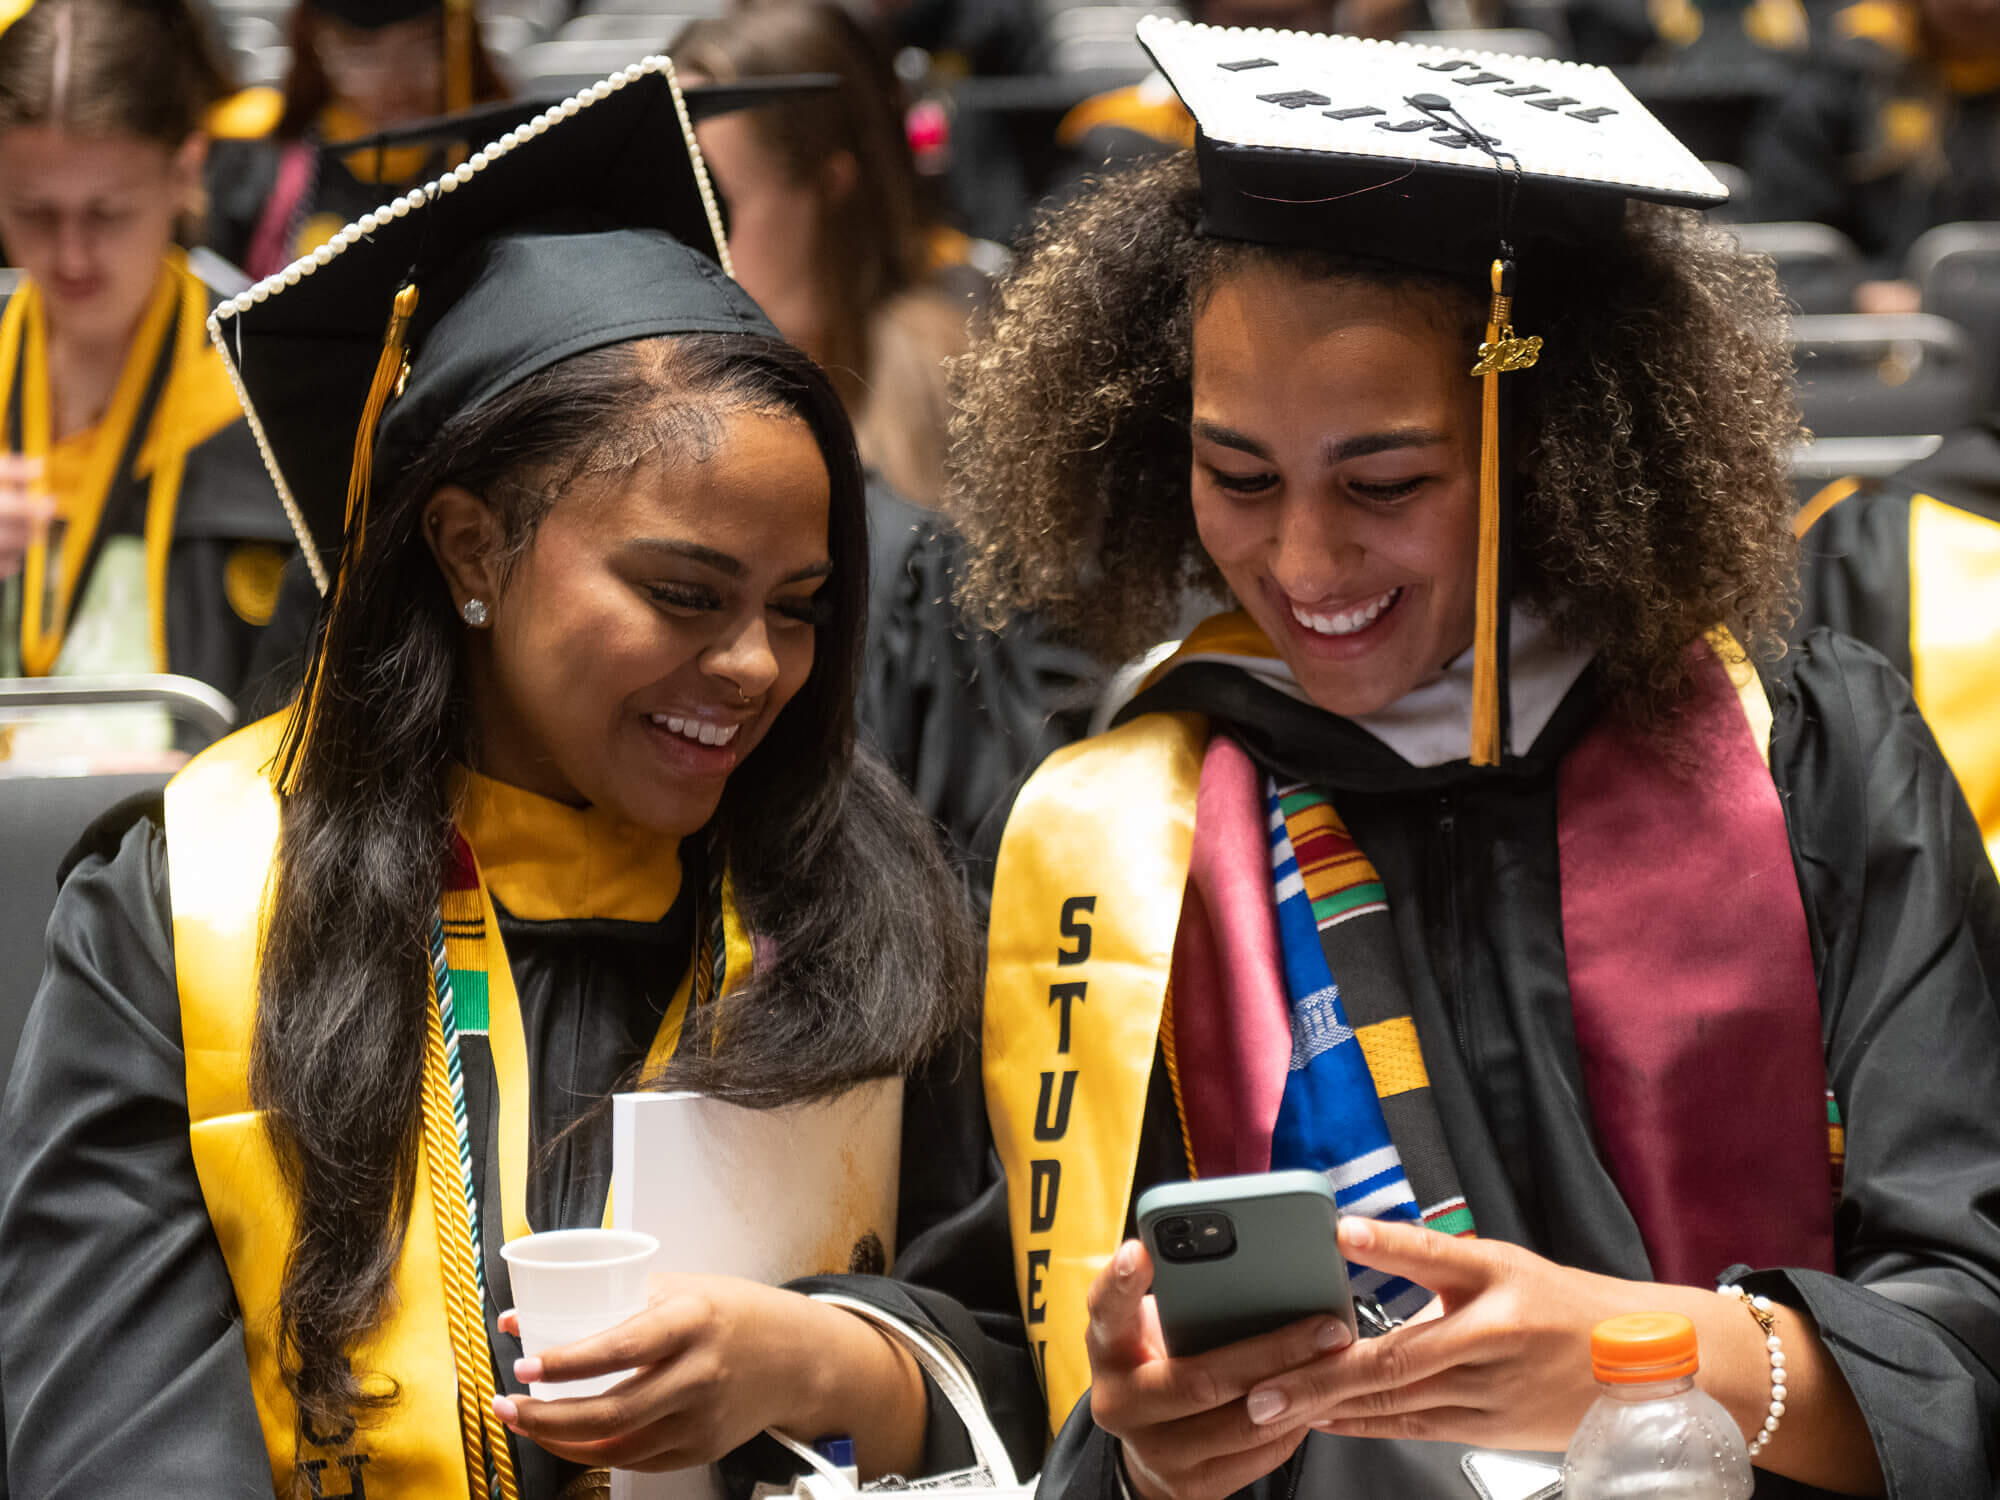 Two VCU graduates in graduation robes smile while looking at a phone.